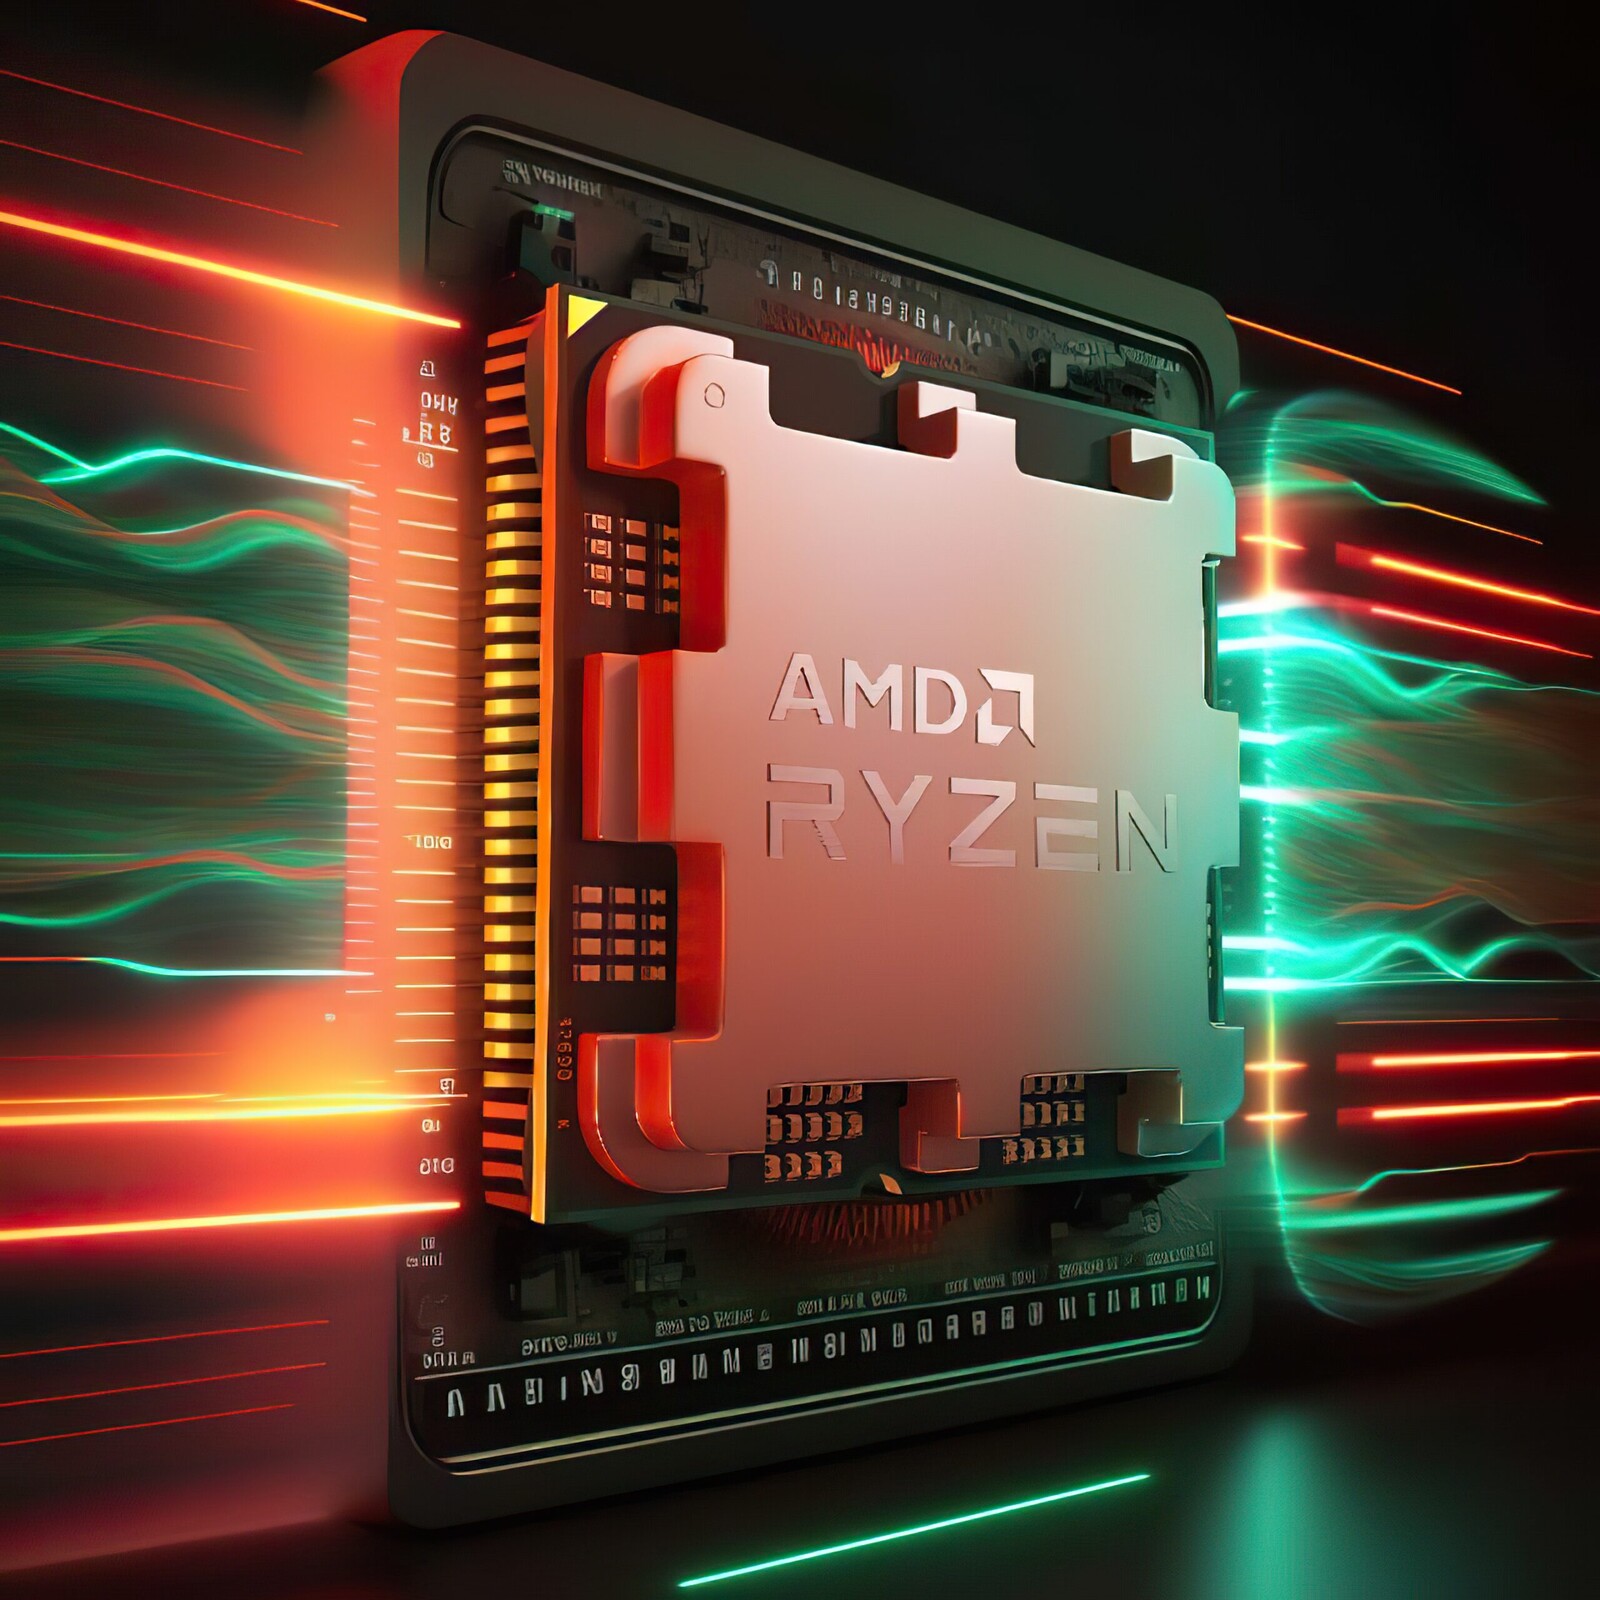 AMD Ryzen 7 7800X3D launch review roundup depicts CPU beating